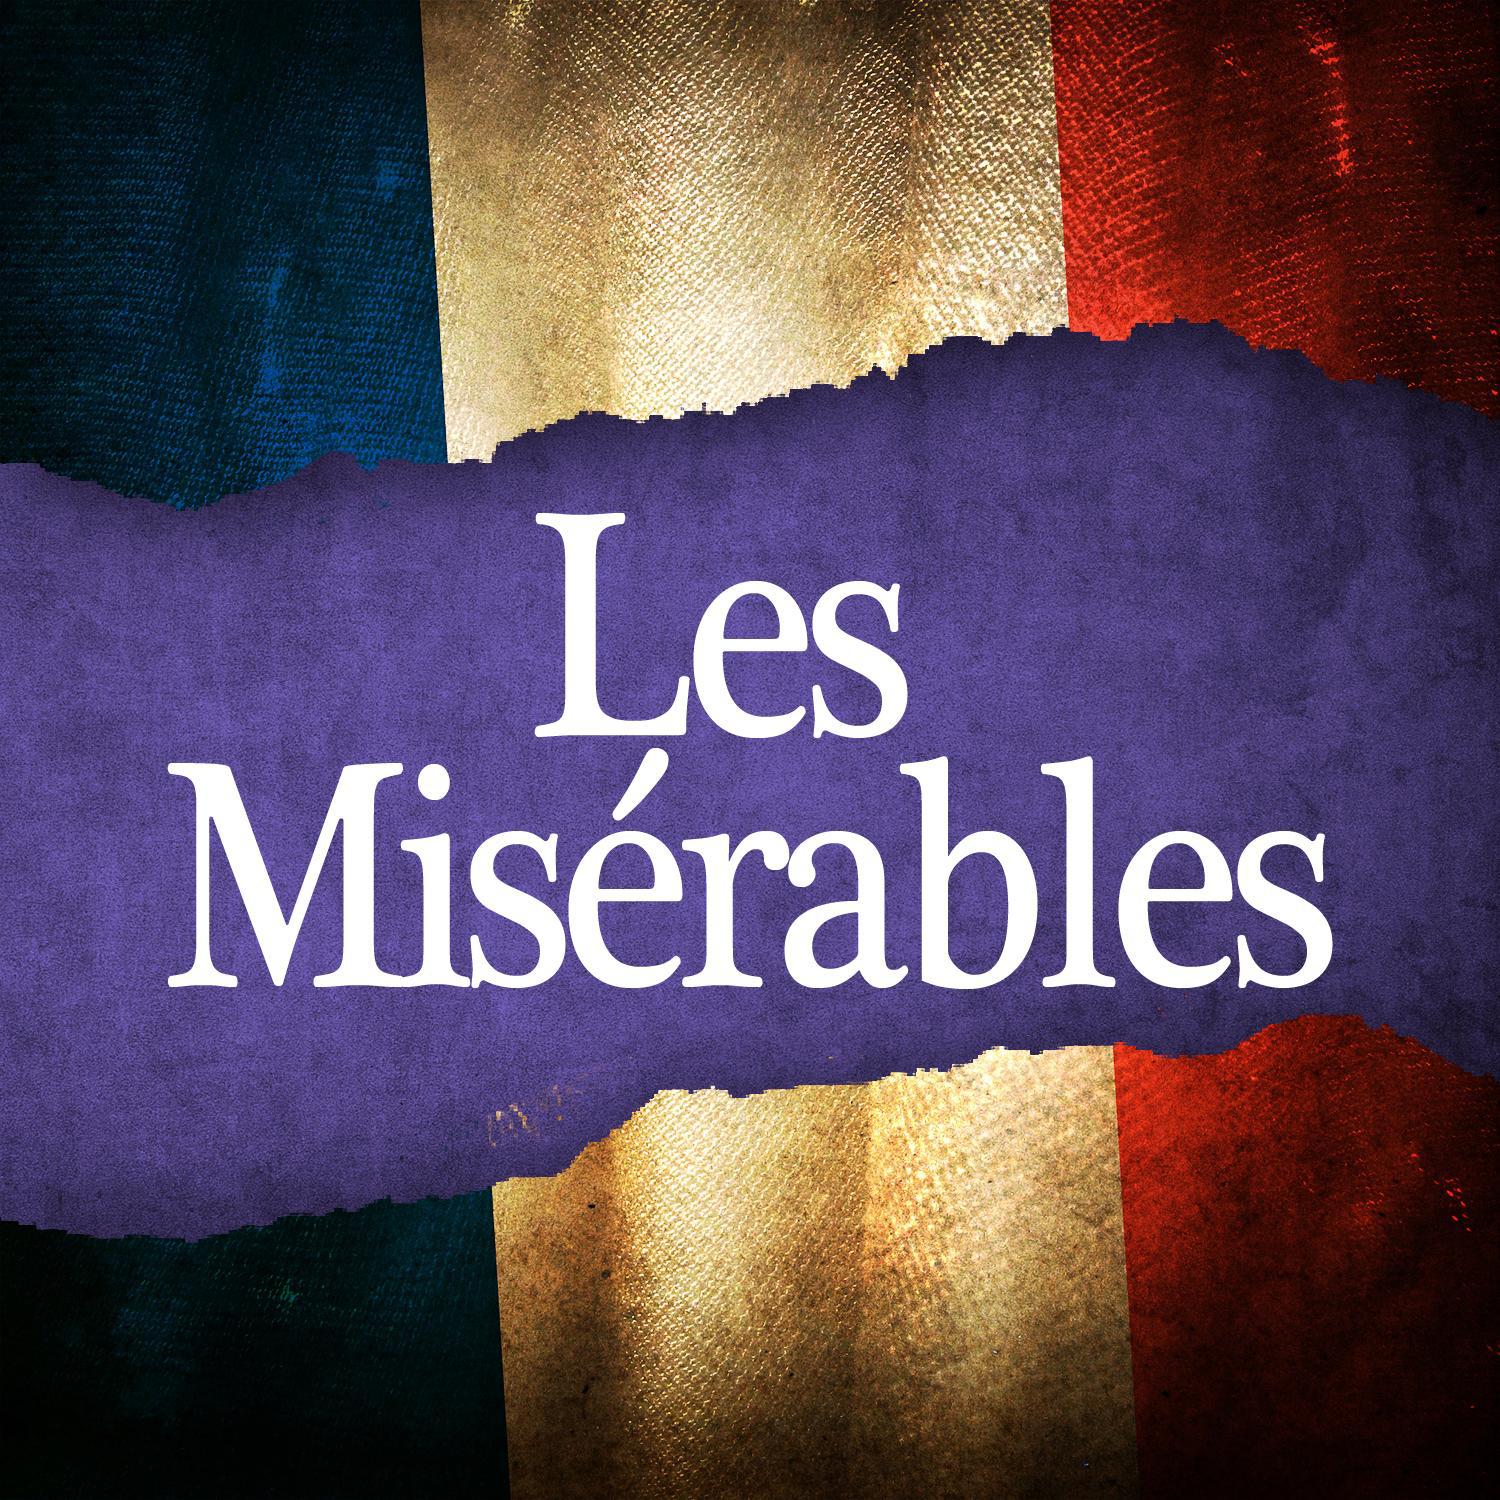 I Dreamed a Dream From " Les Mise rables"